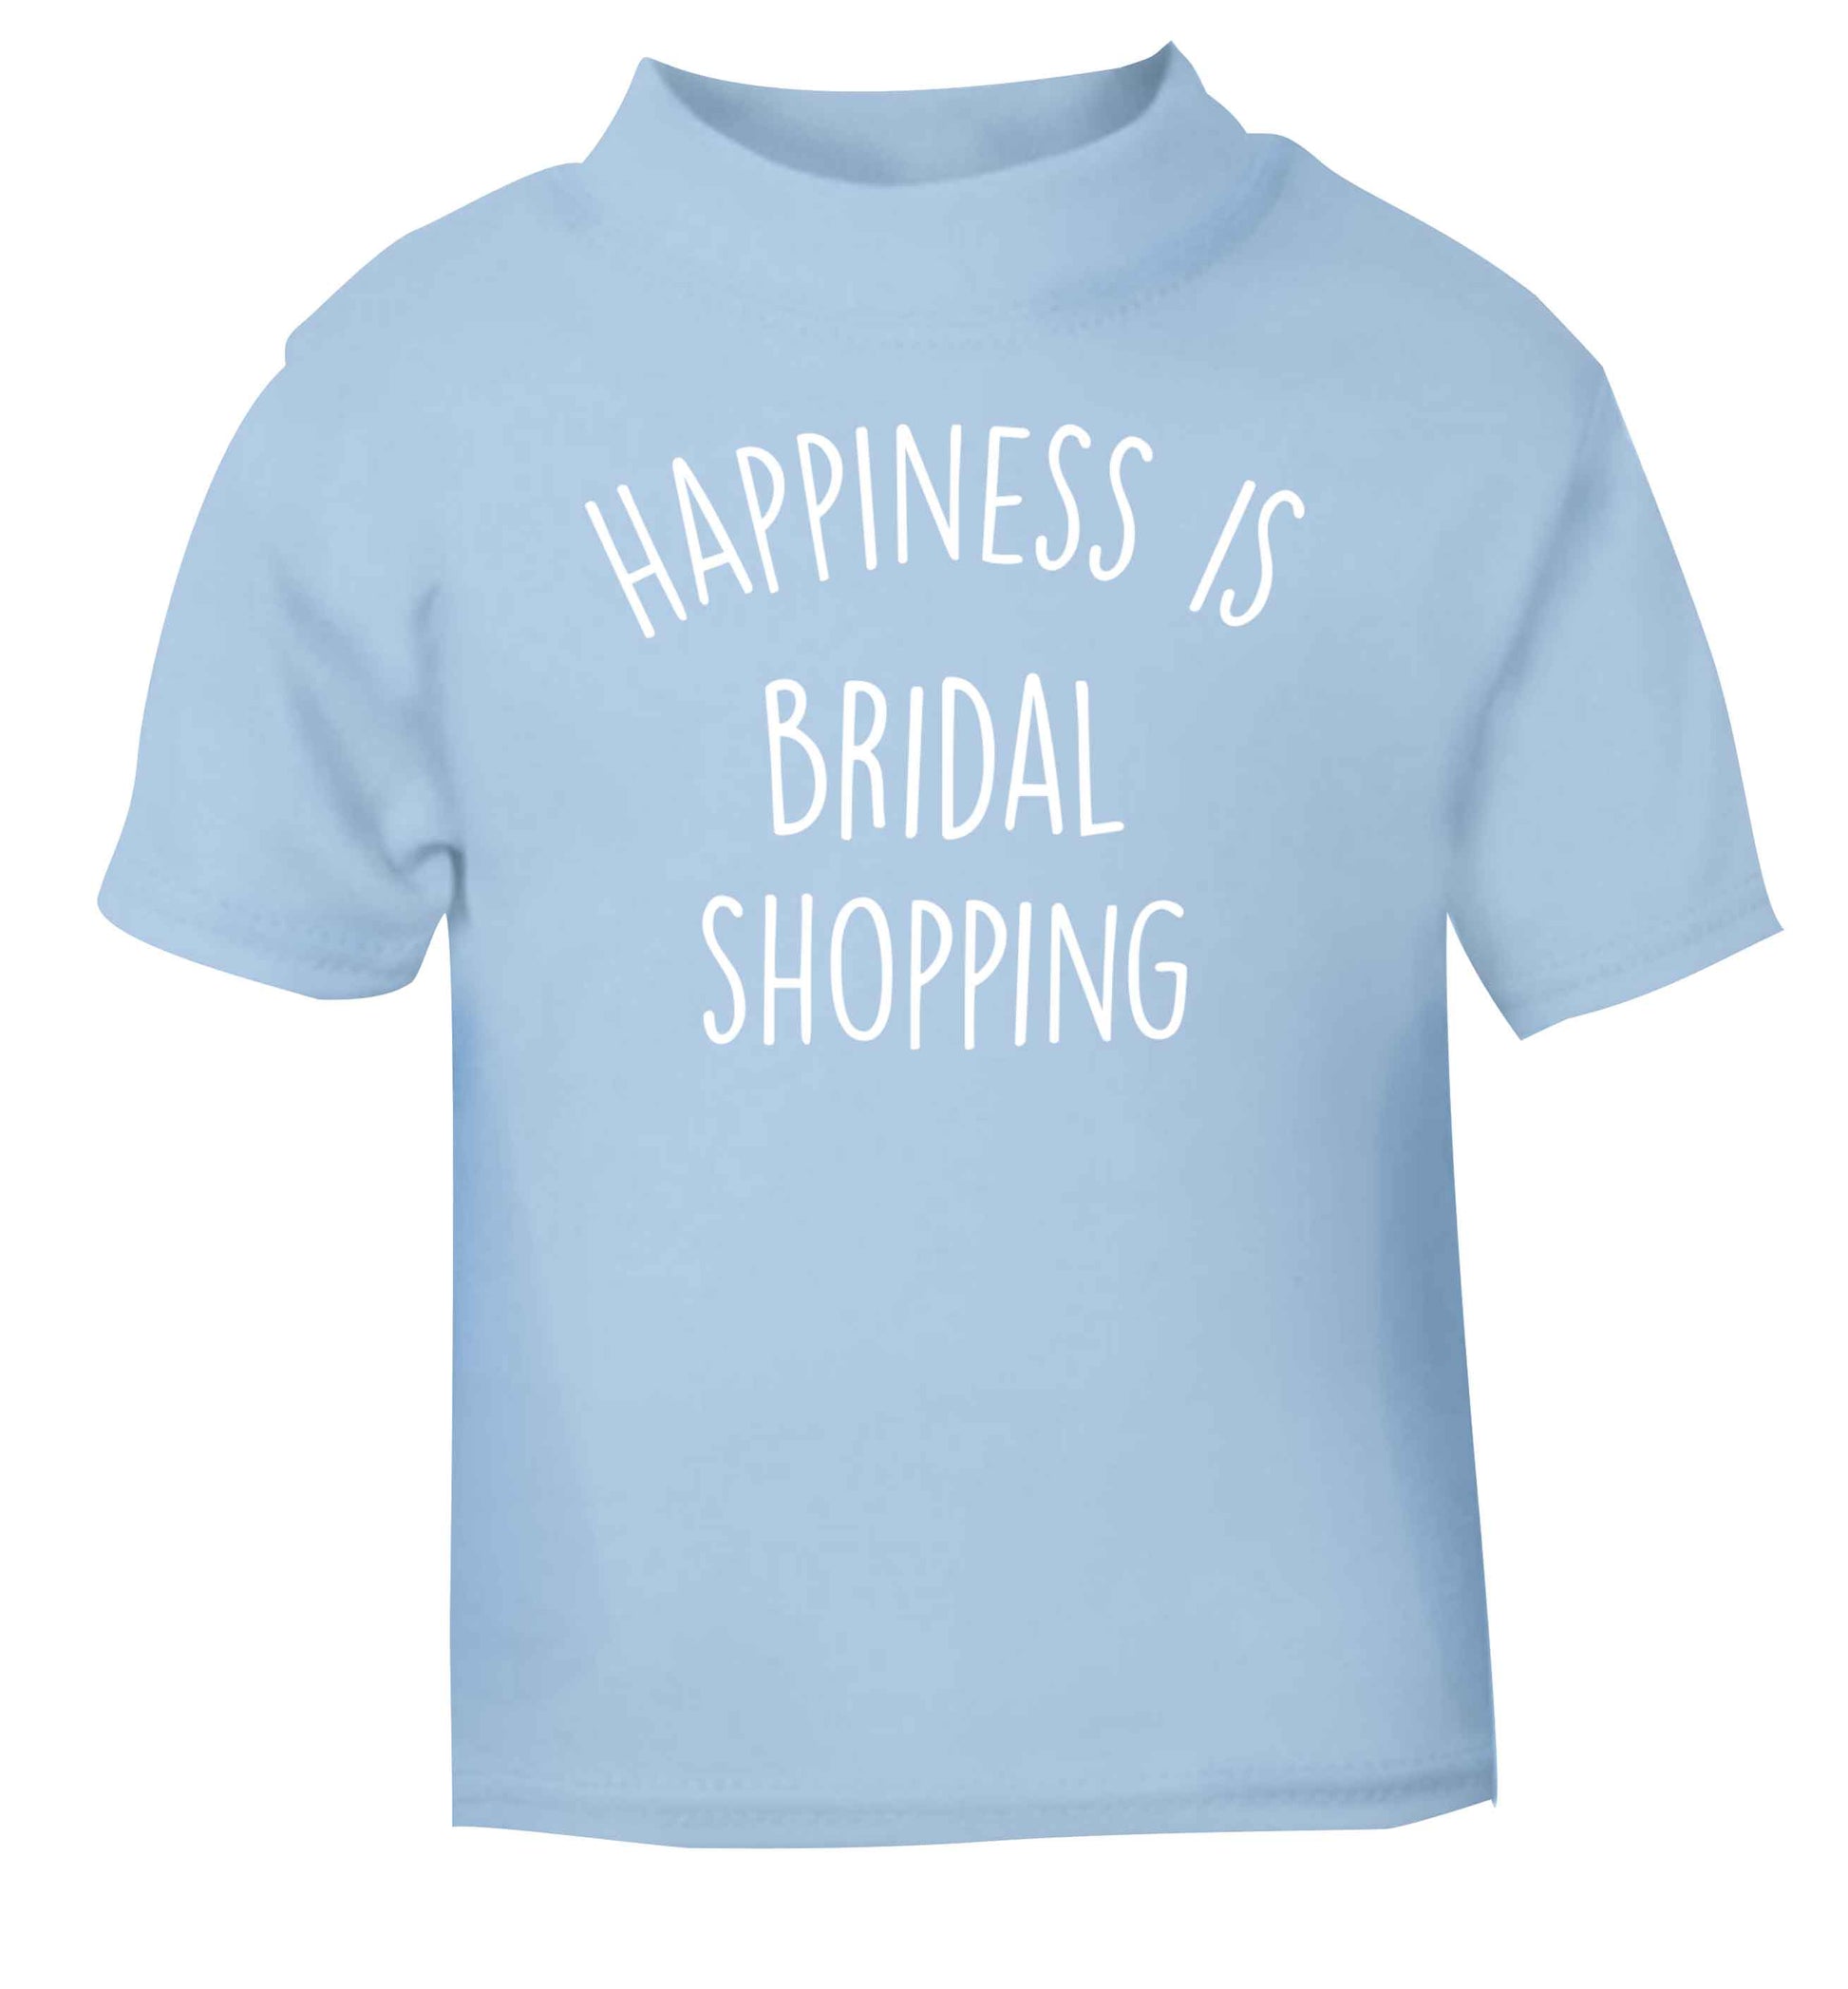 Happiness is bridal shopping light blue baby toddler Tshirt 2 Years